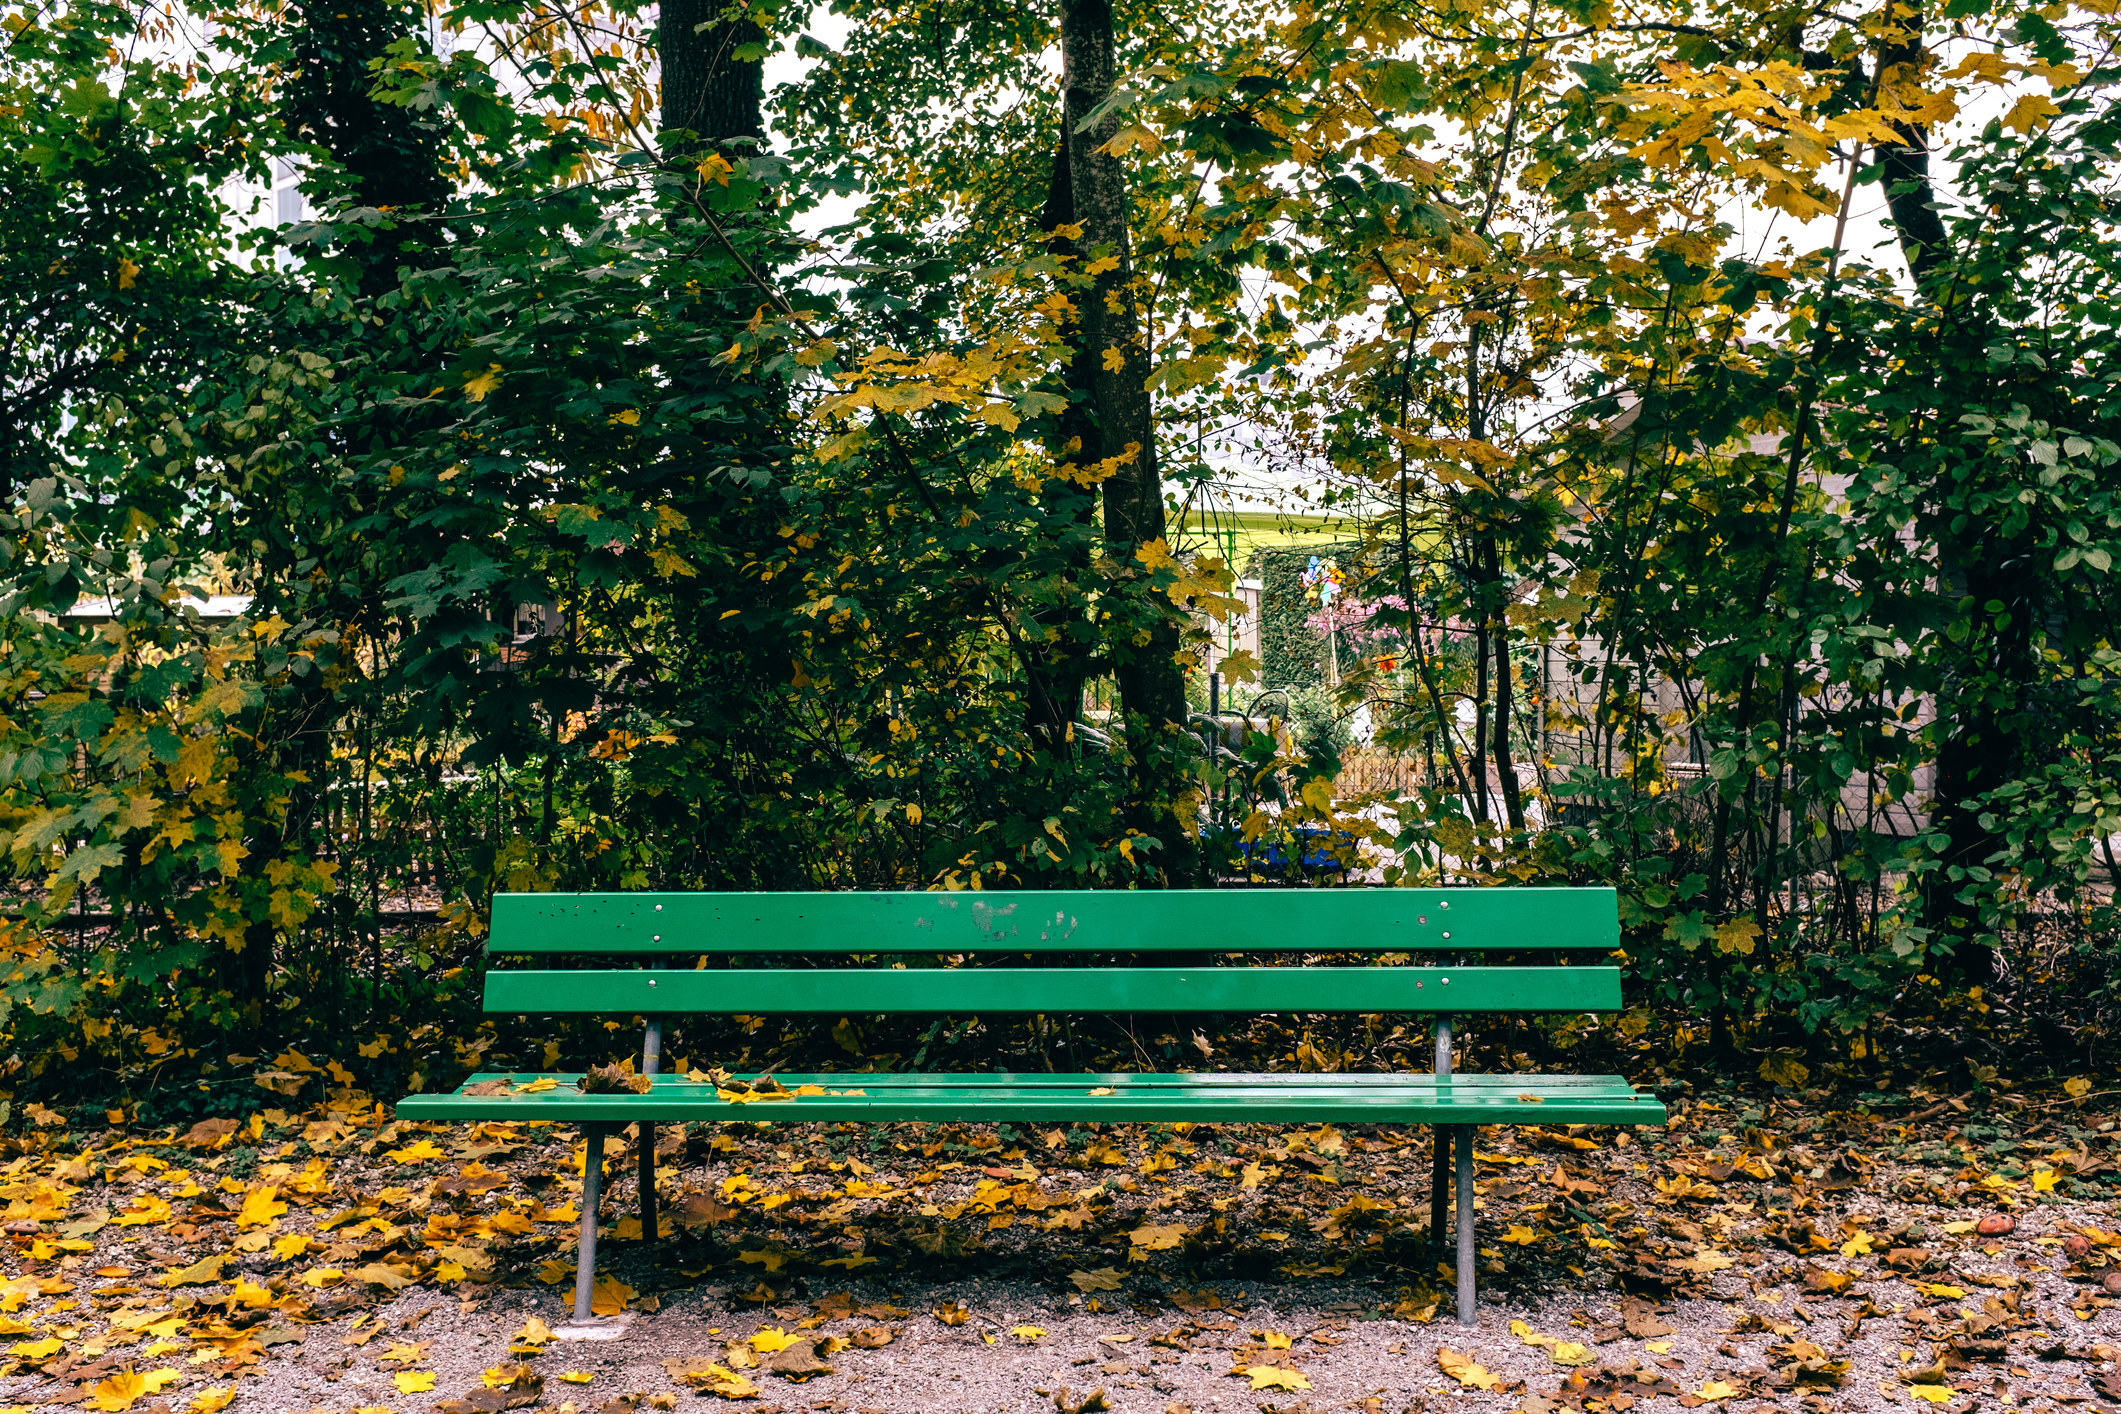 An empty bench surrounded by trees and fallen leaves